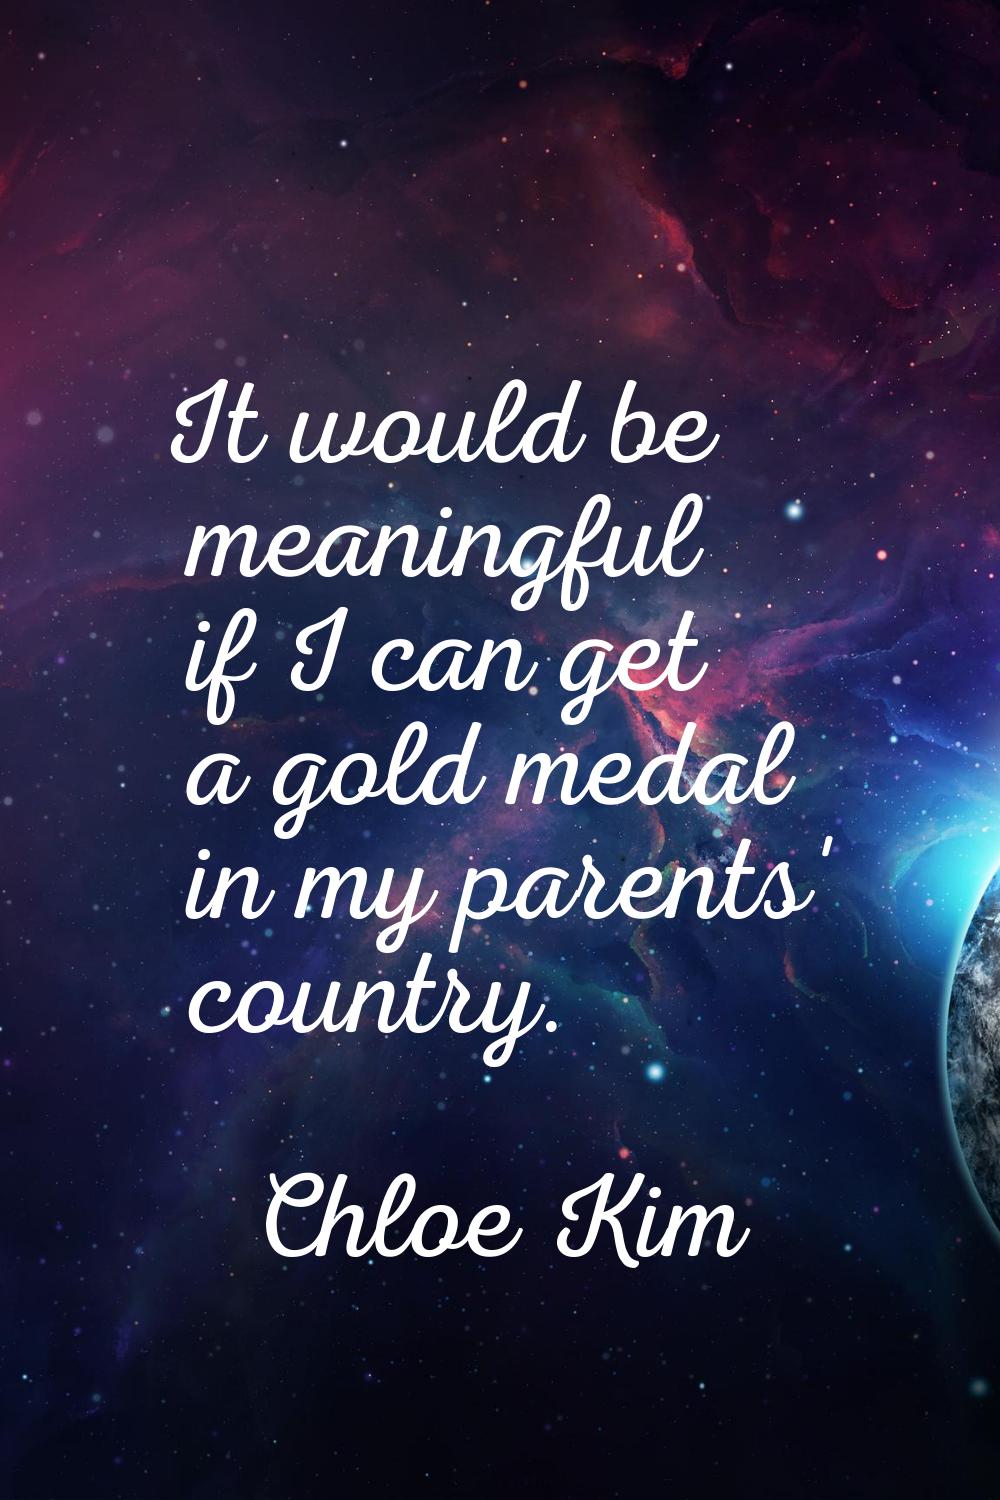 It would be meaningful if I can get a gold medal in my parents' country.